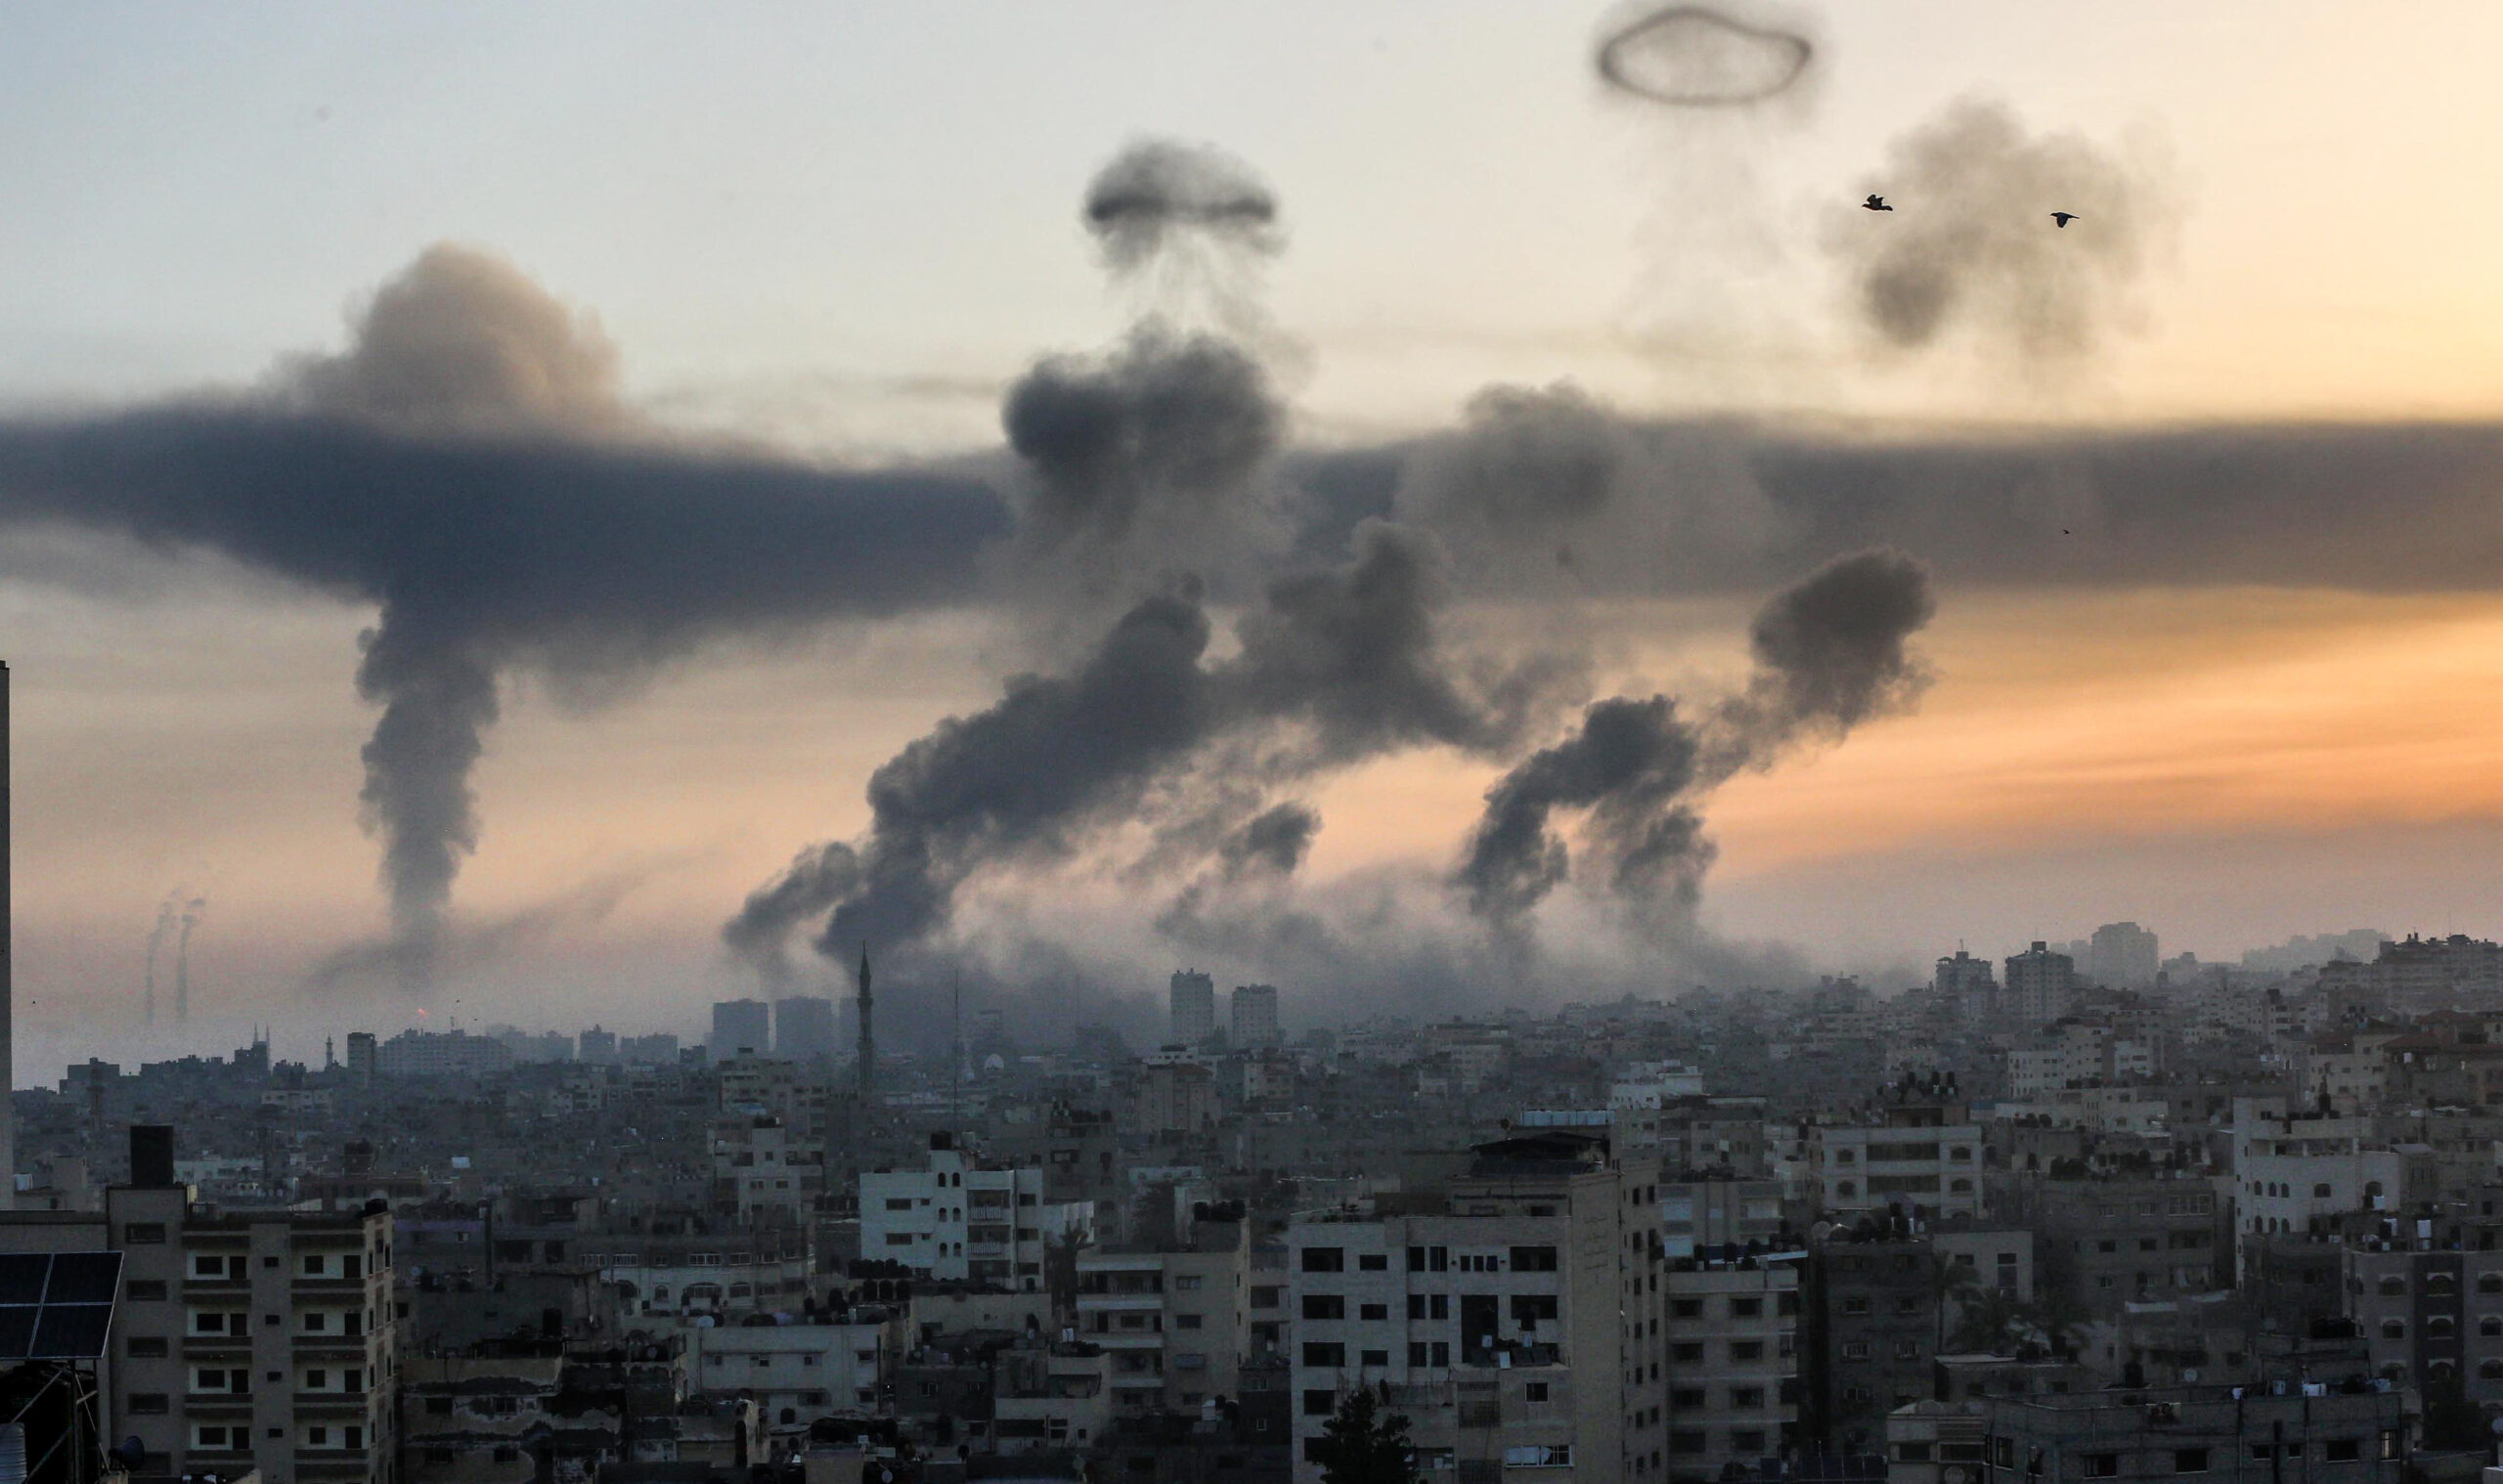 Israeli,Air,Strikes,On,Residential,Buildings,And,Towers,In,Gaza